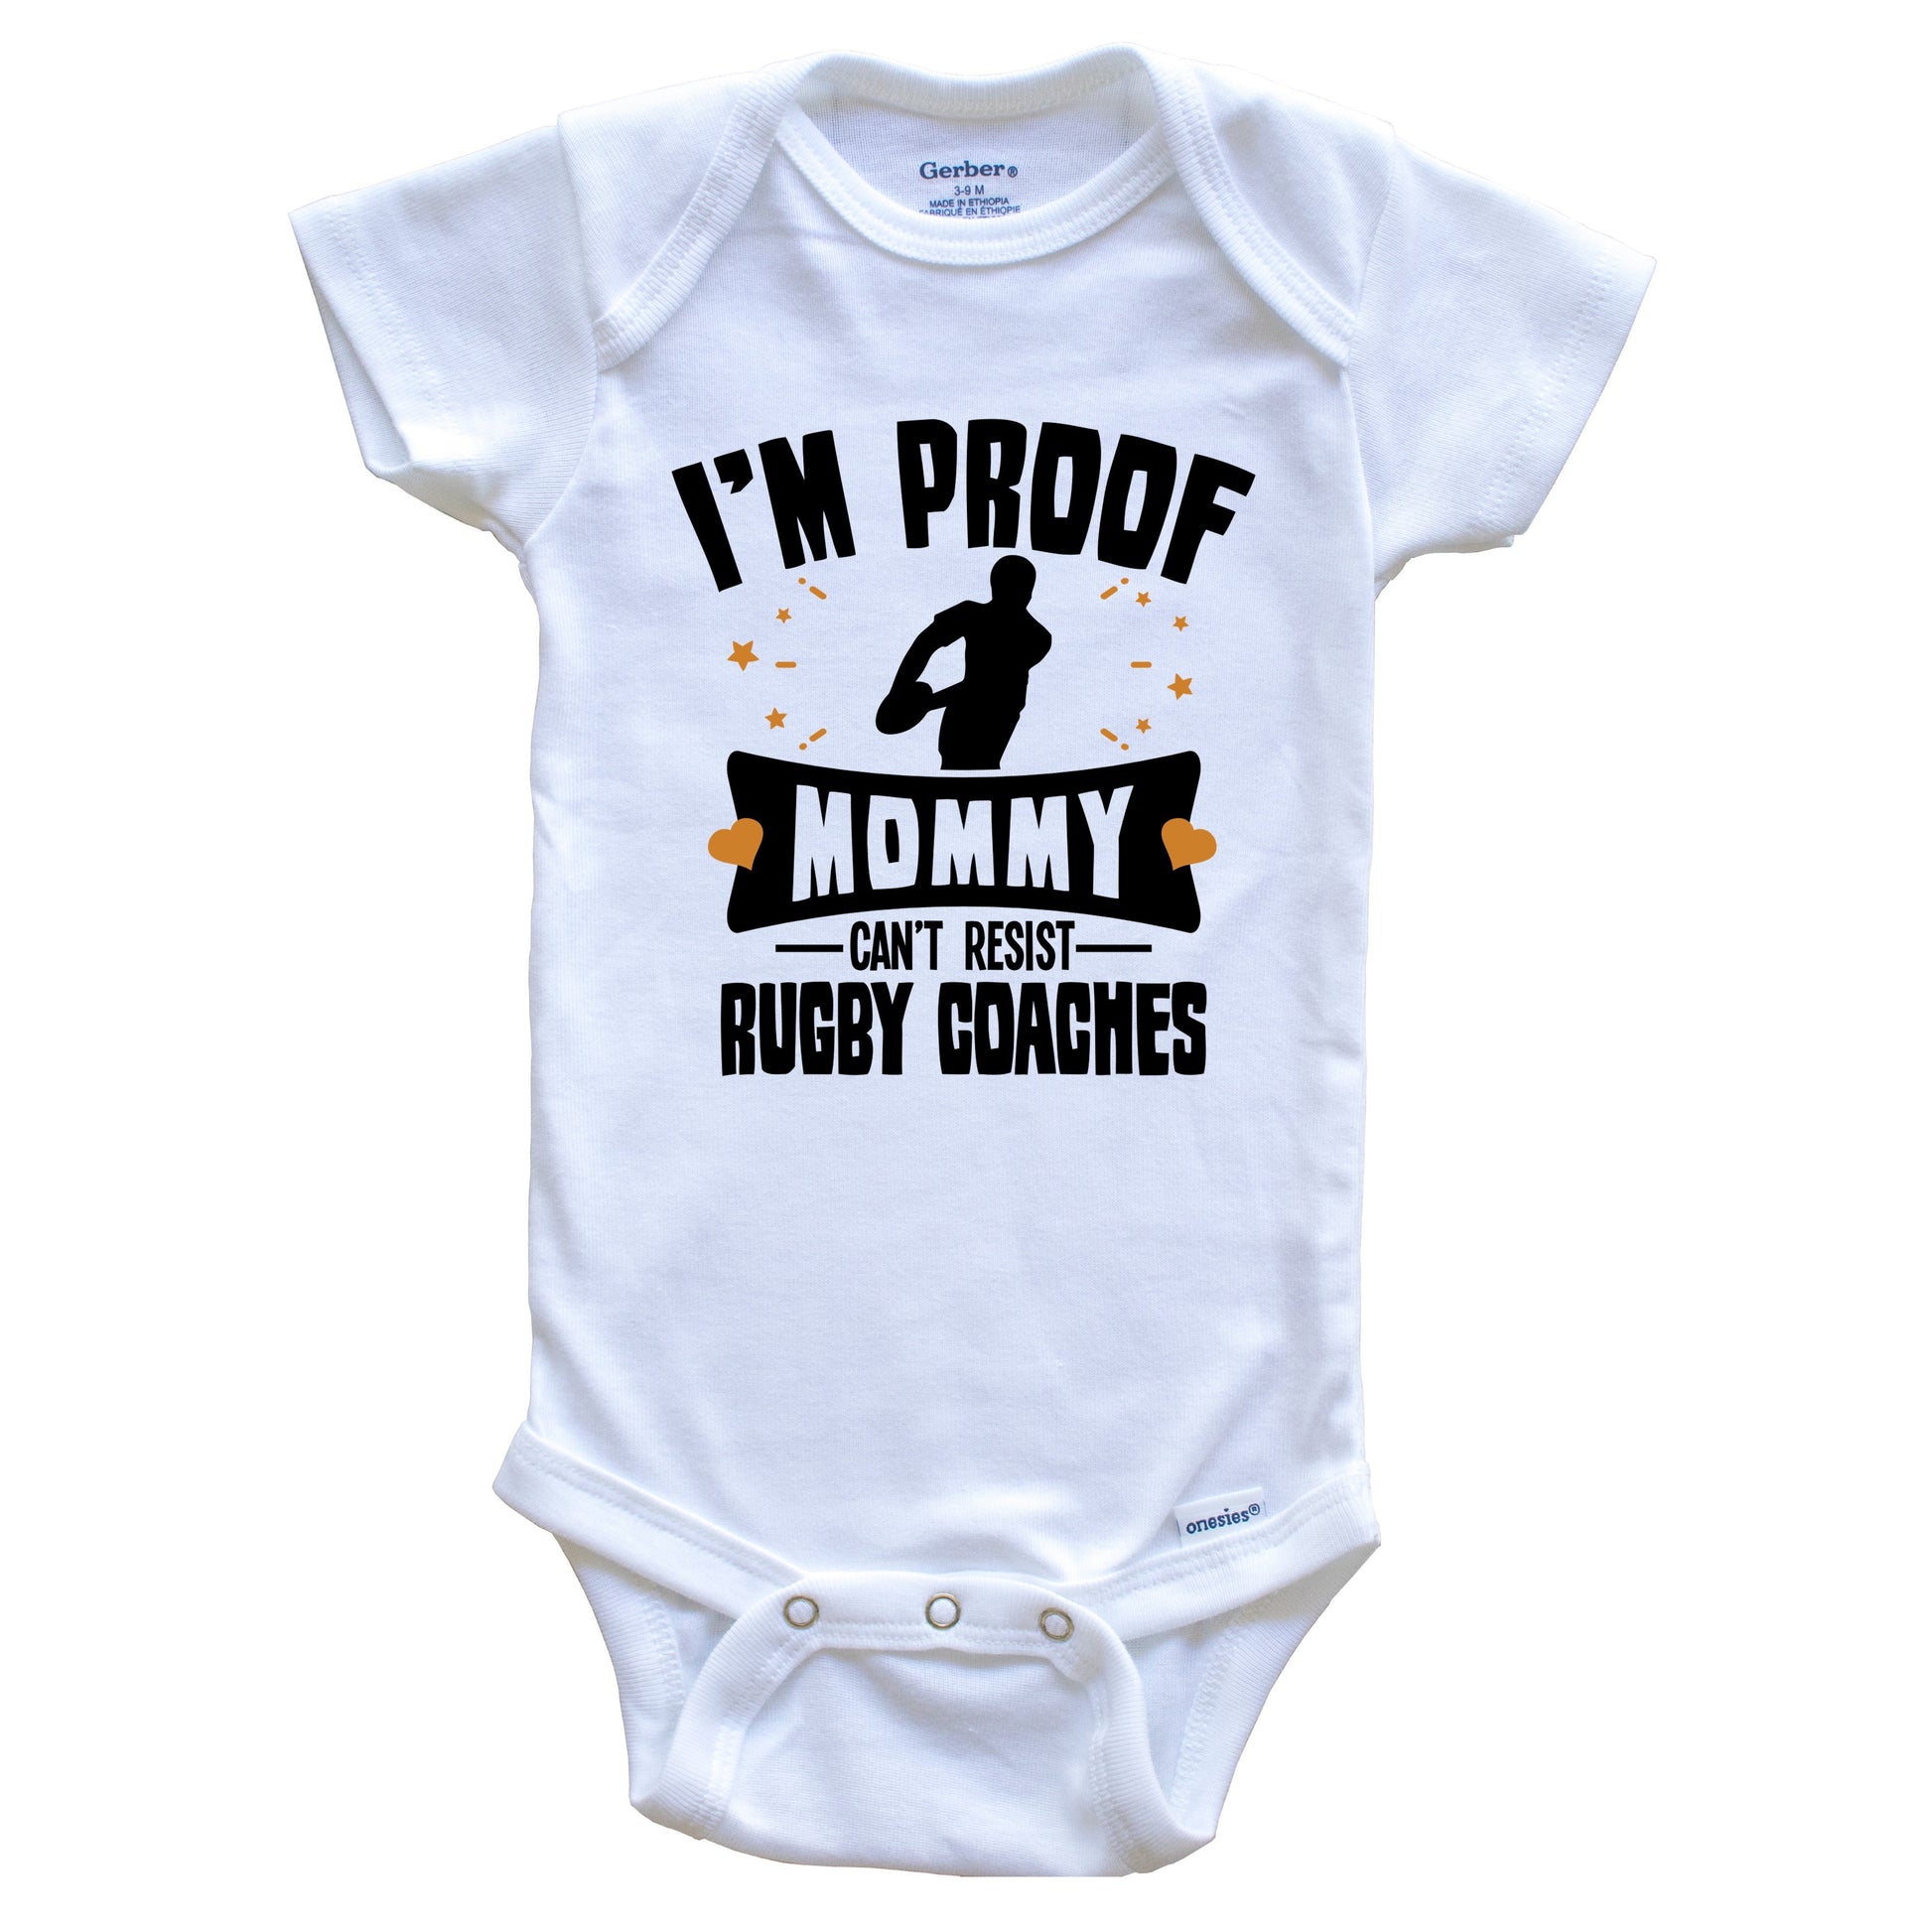 Funny Rugby Onesie - I'm Proof Mommy Can't Resist Rugby Coaches Baby Bodysuit